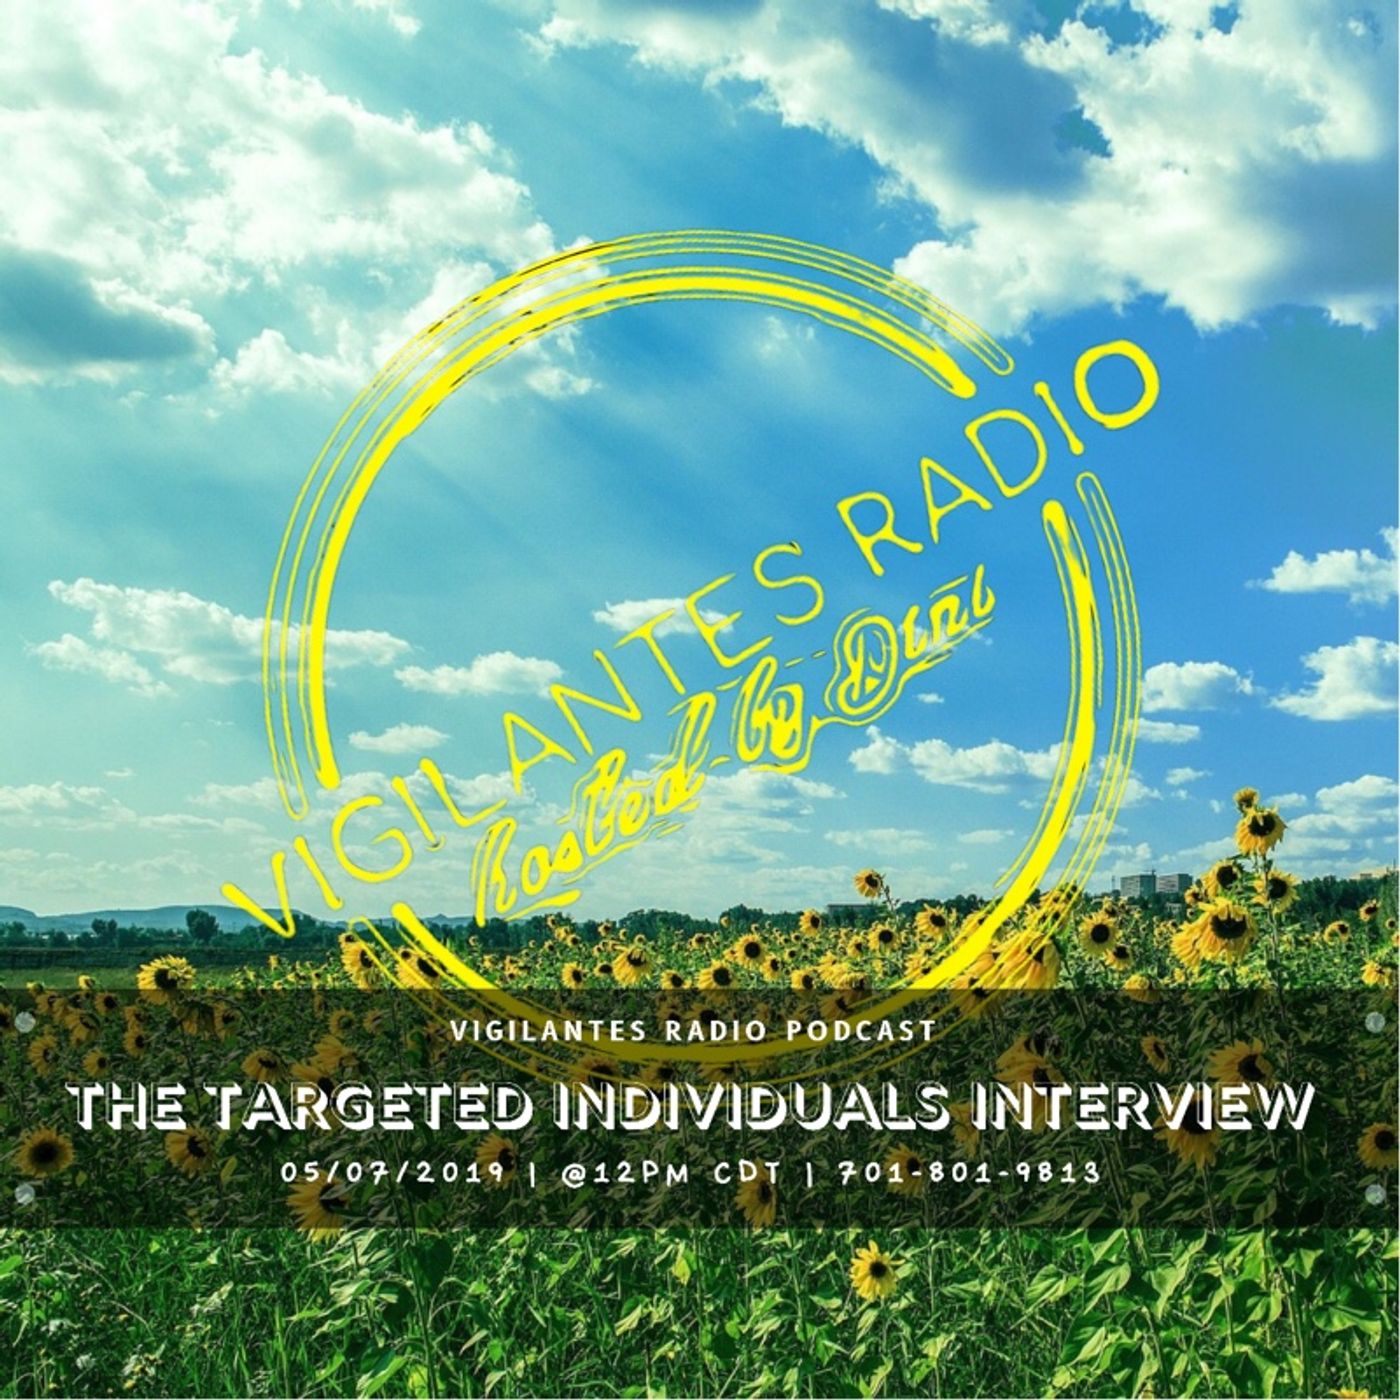 The Targeted Individuals Interview.